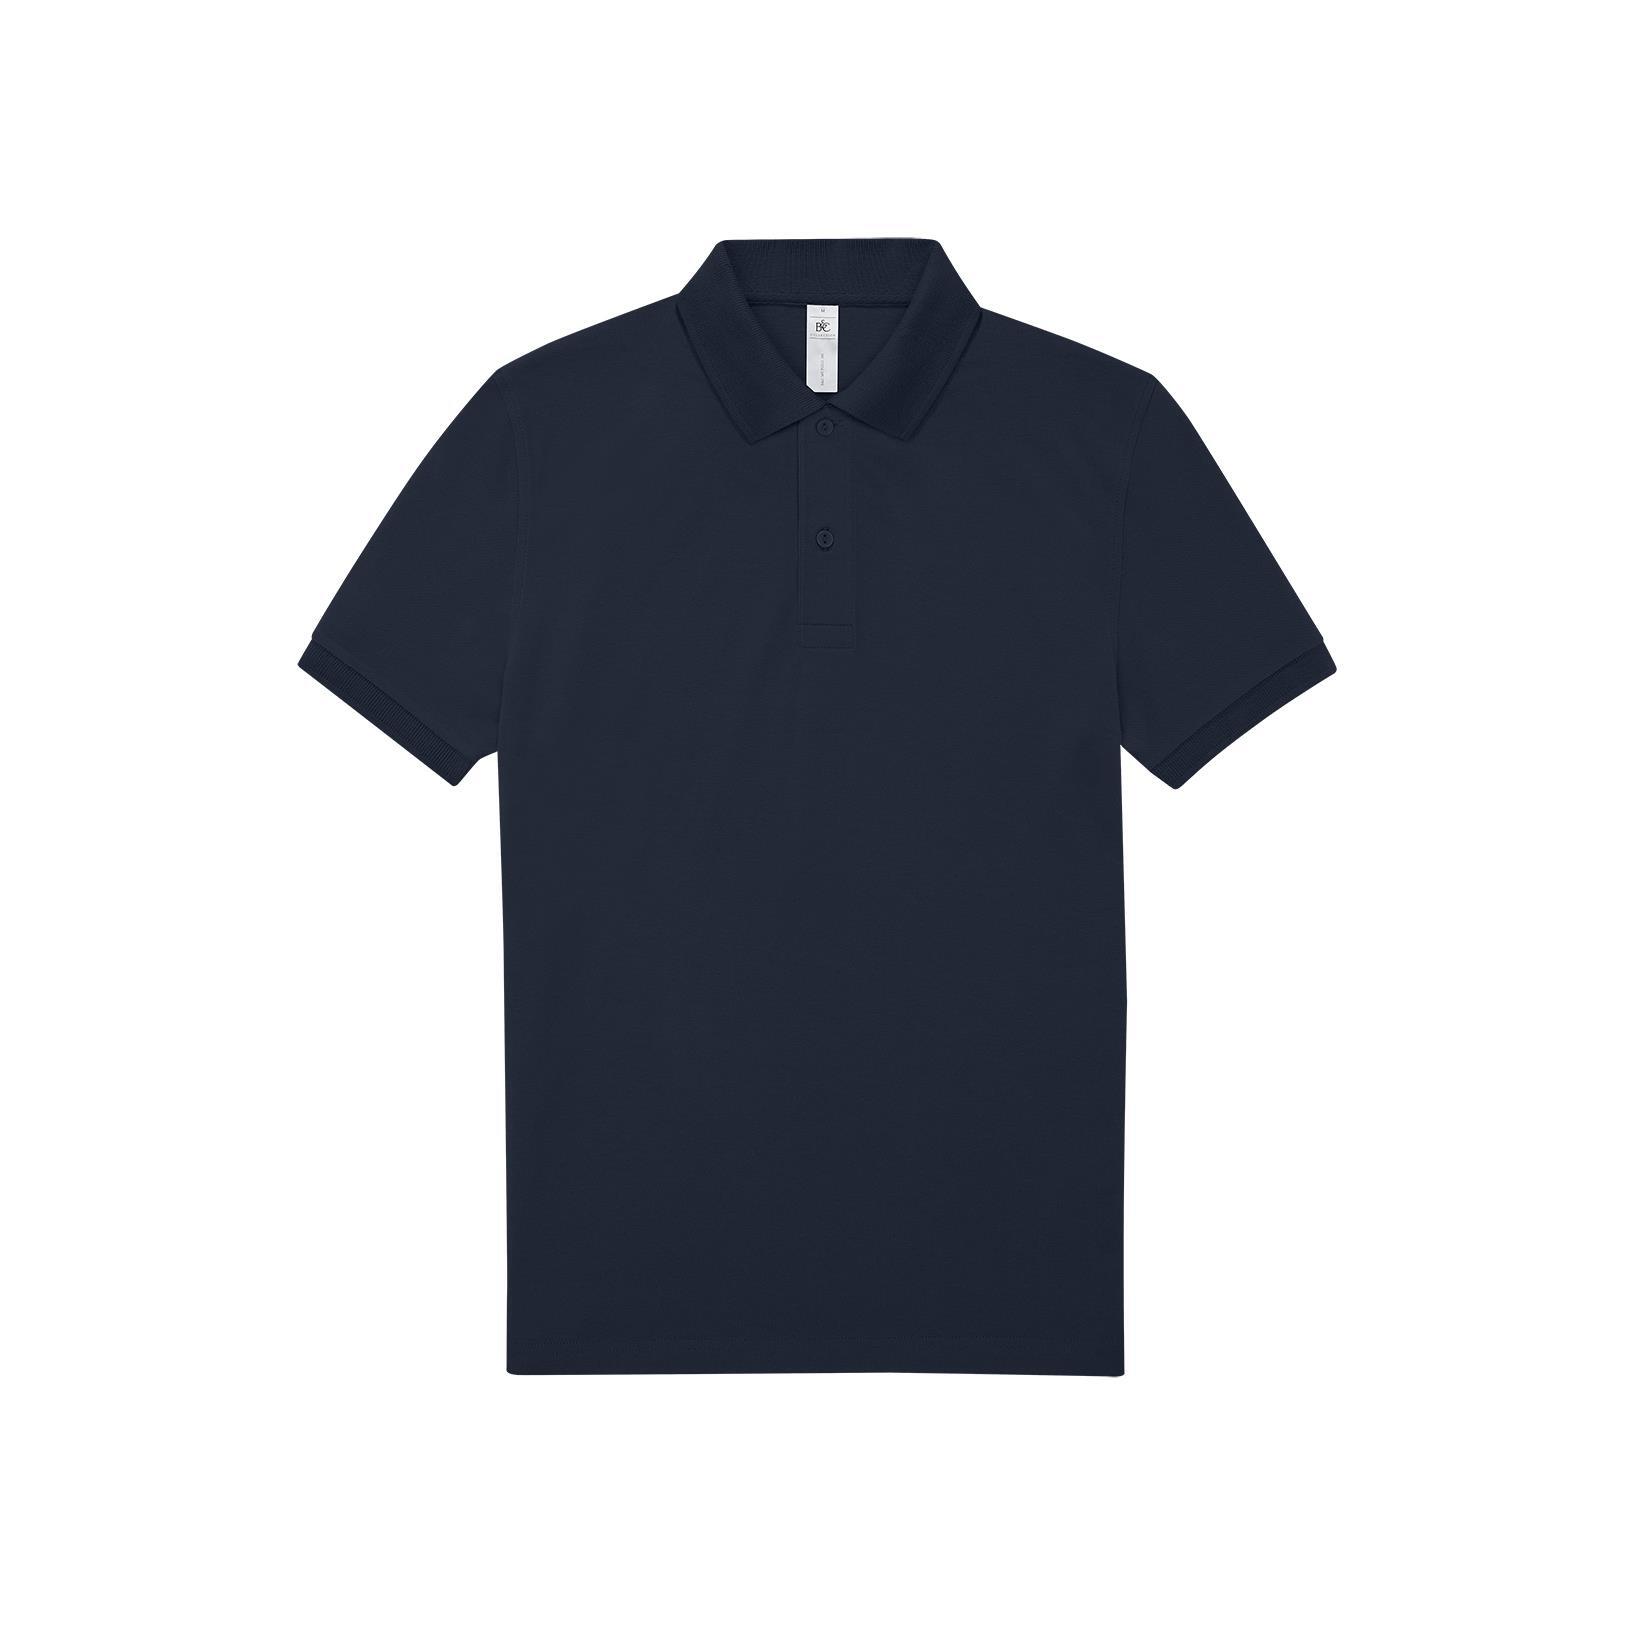 Polo voor mannen donkerblauw moderne polo